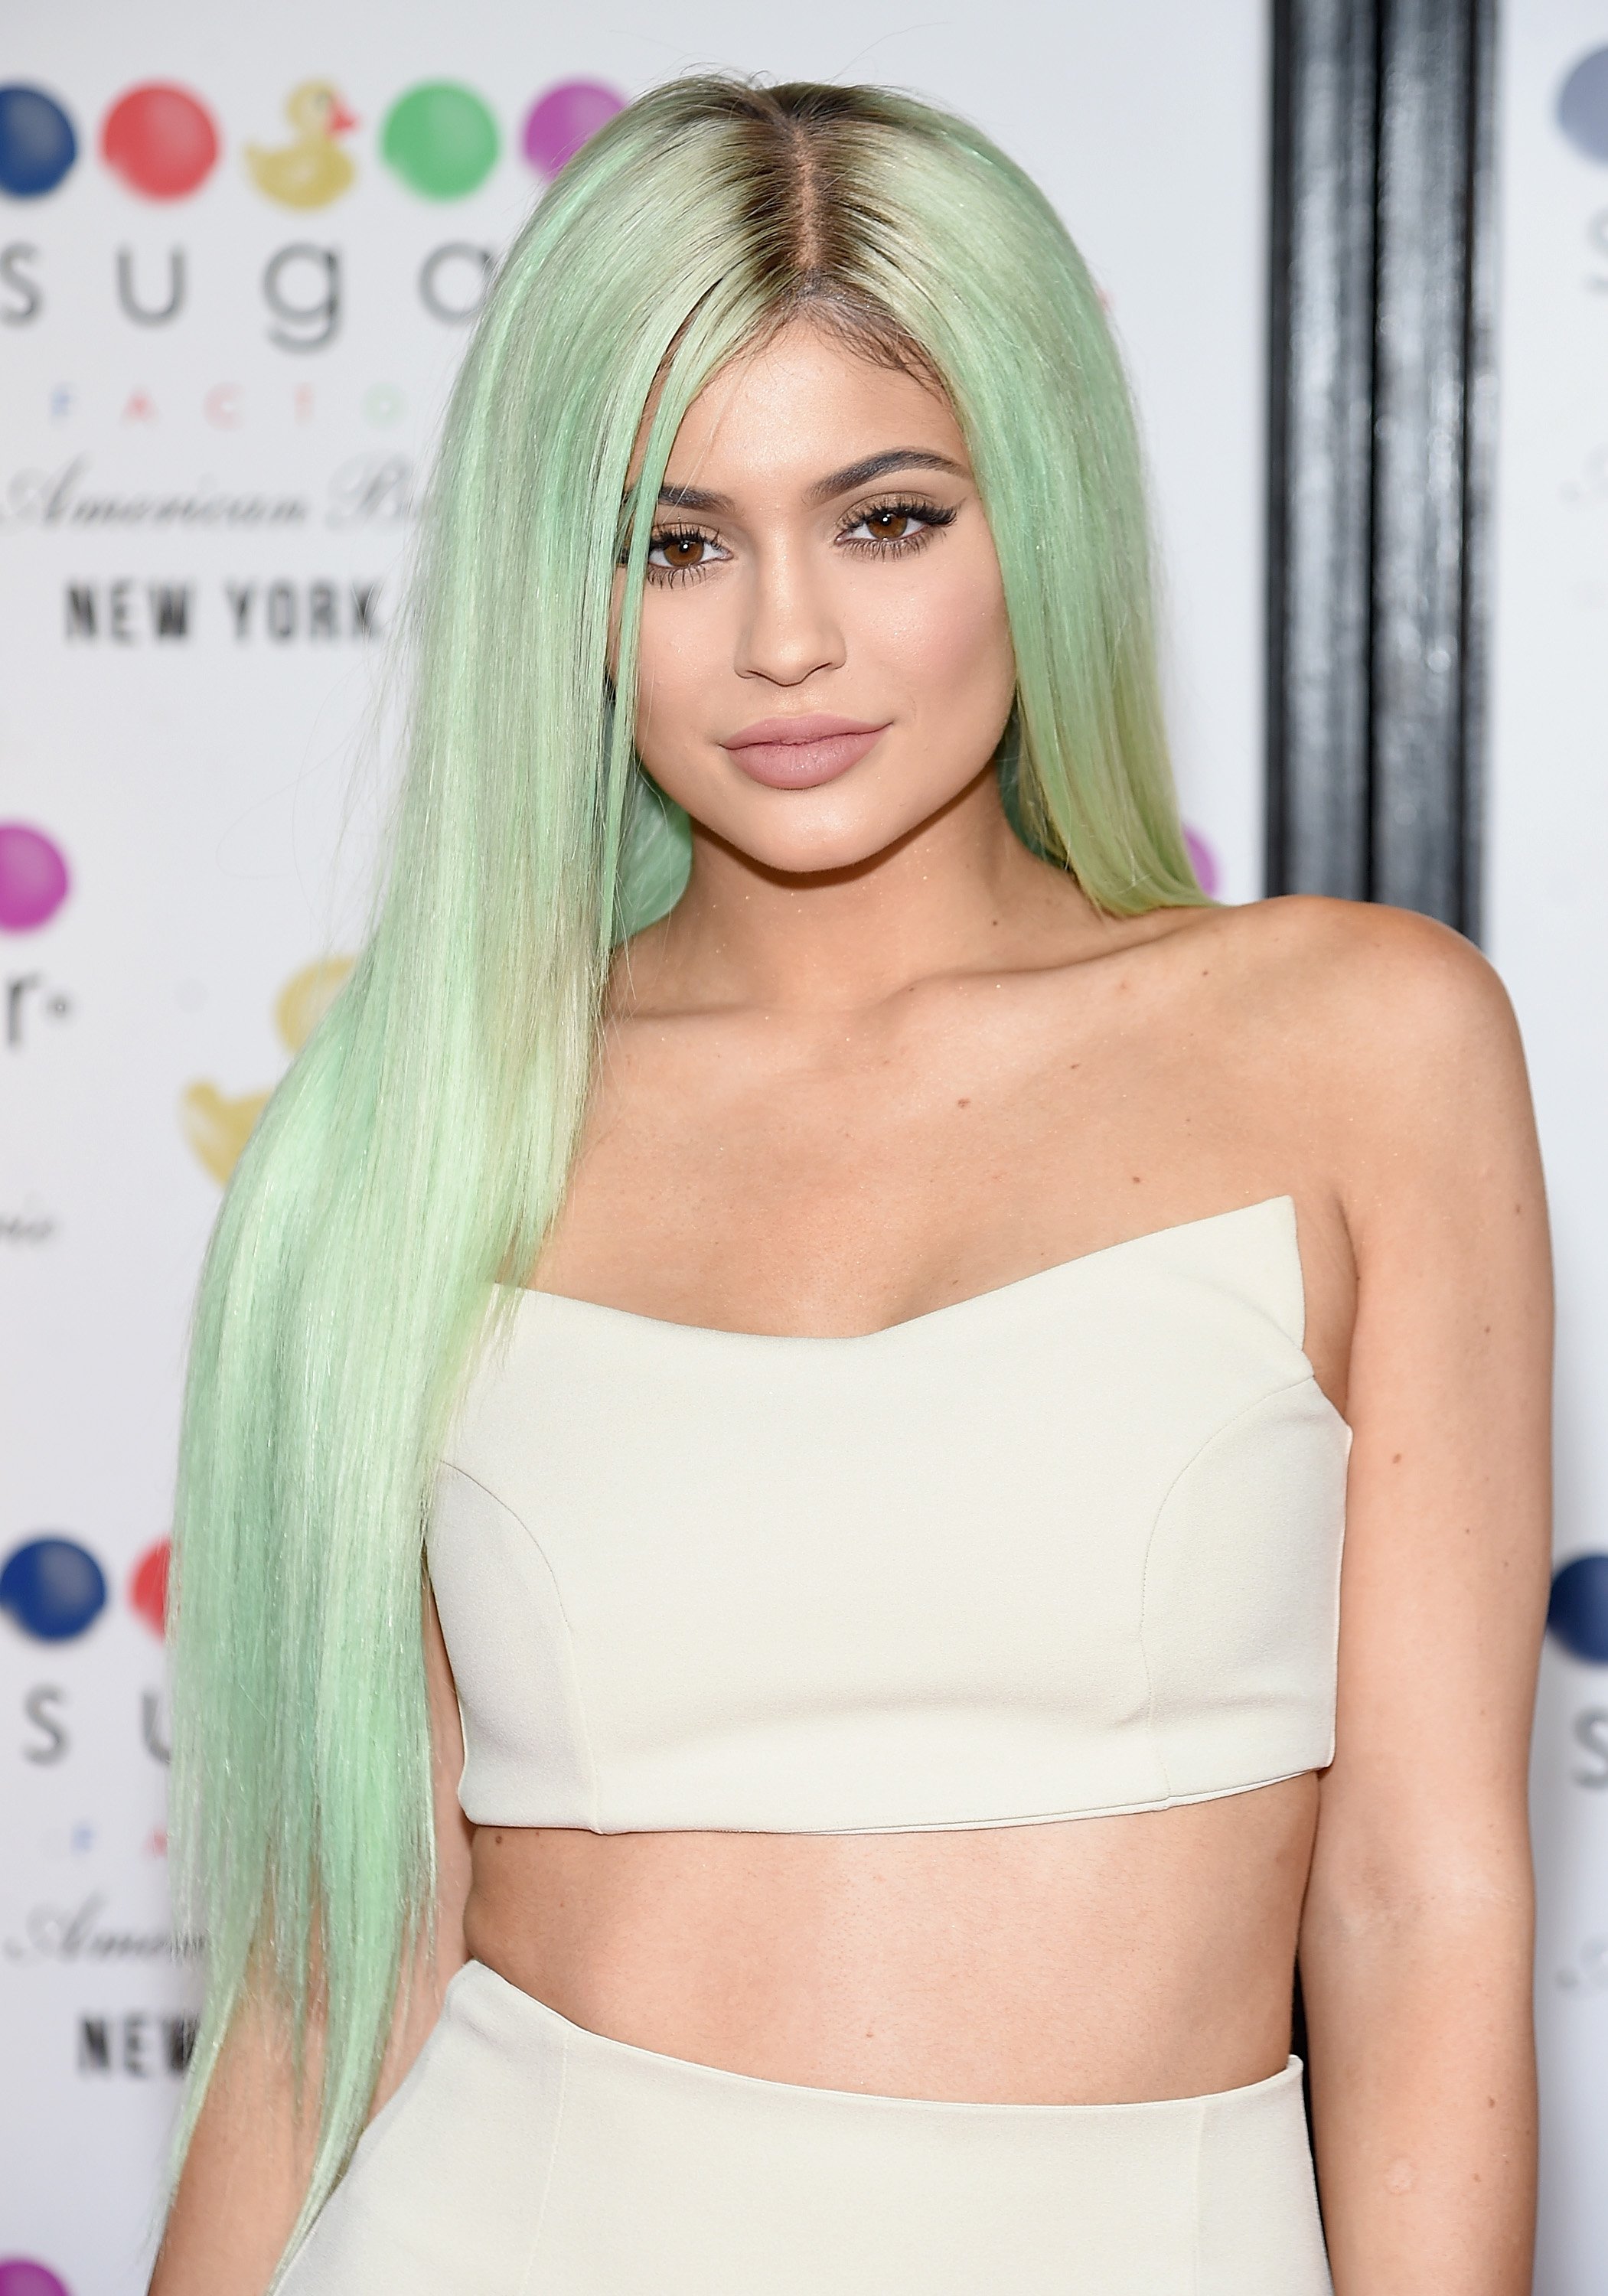 Kylie Jenner attends the Grand Opening of the Sugar Factory American Brasserie on September 16, 2015. | Source: Getty Images